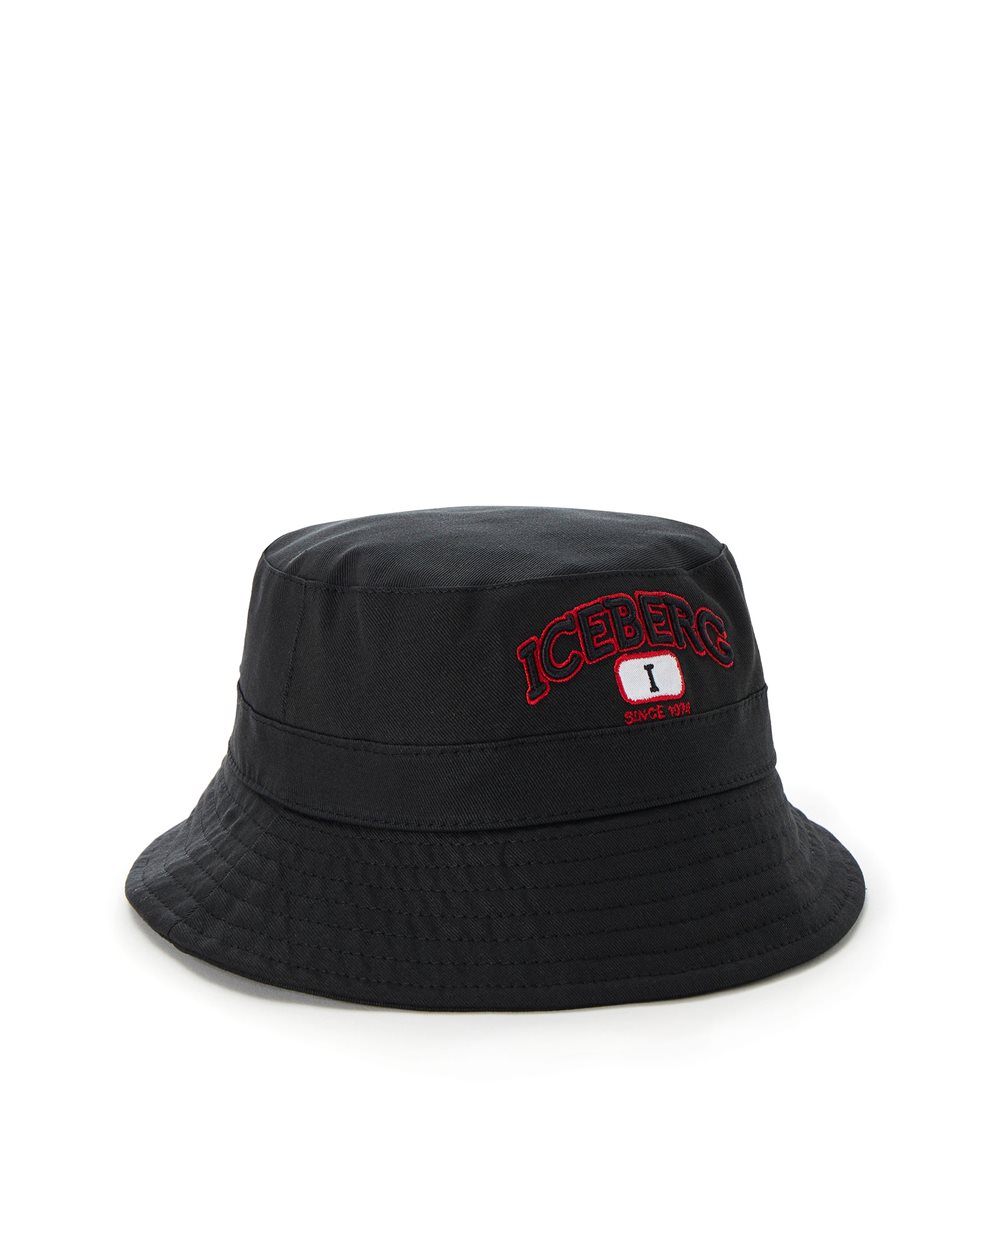 Bucket hat with logo -  ( SECONDO STEP US )  PROMO UP TO 50%  | Iceberg - Official Website